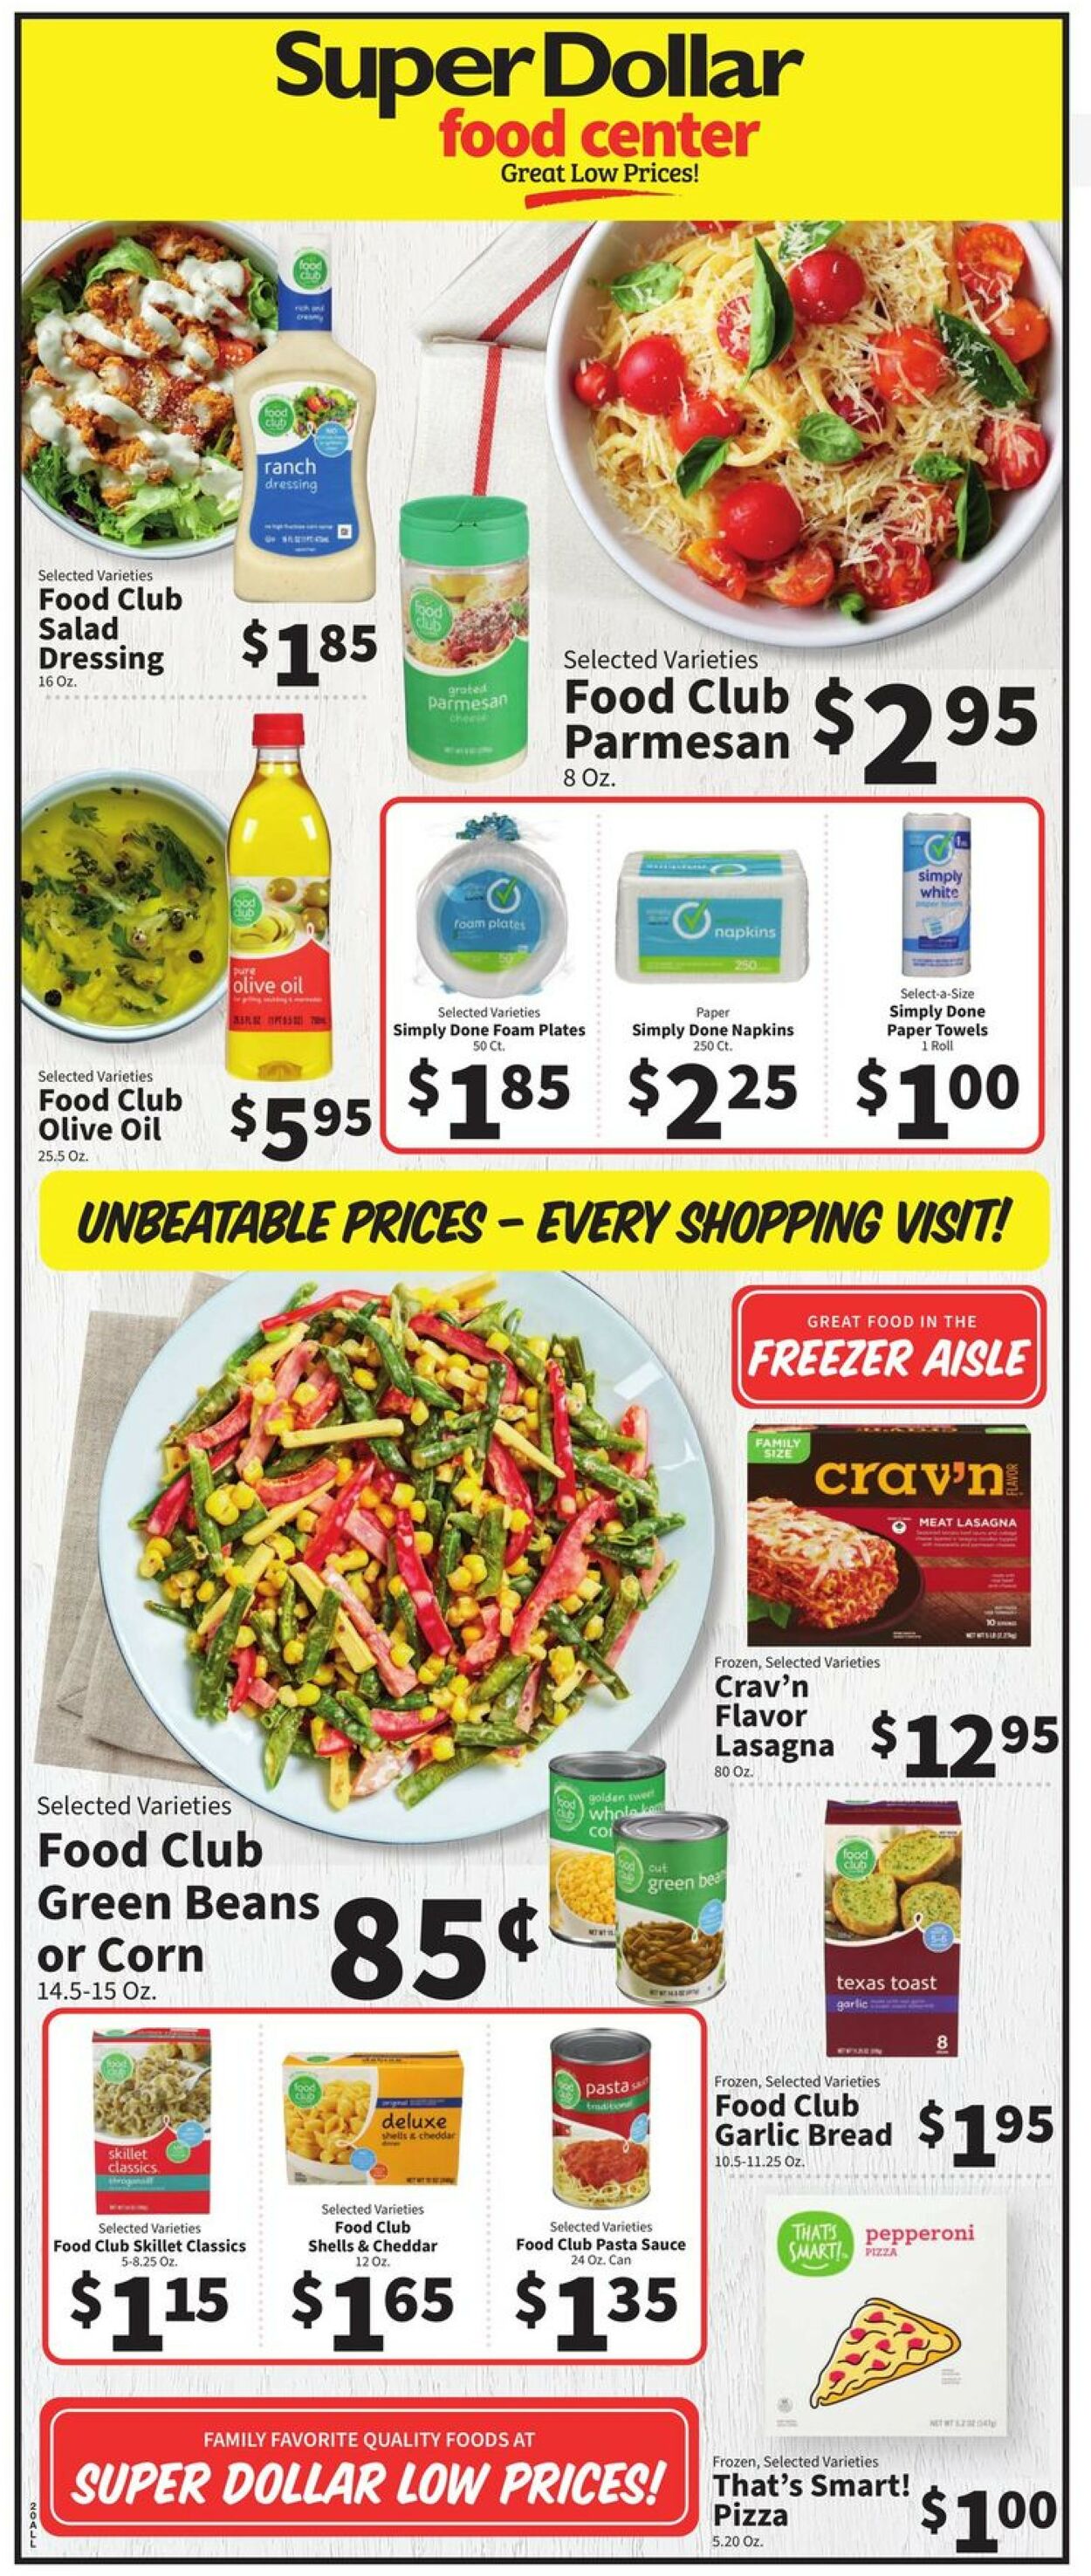 Super Dollar Food Center Ad from 09/21/2022